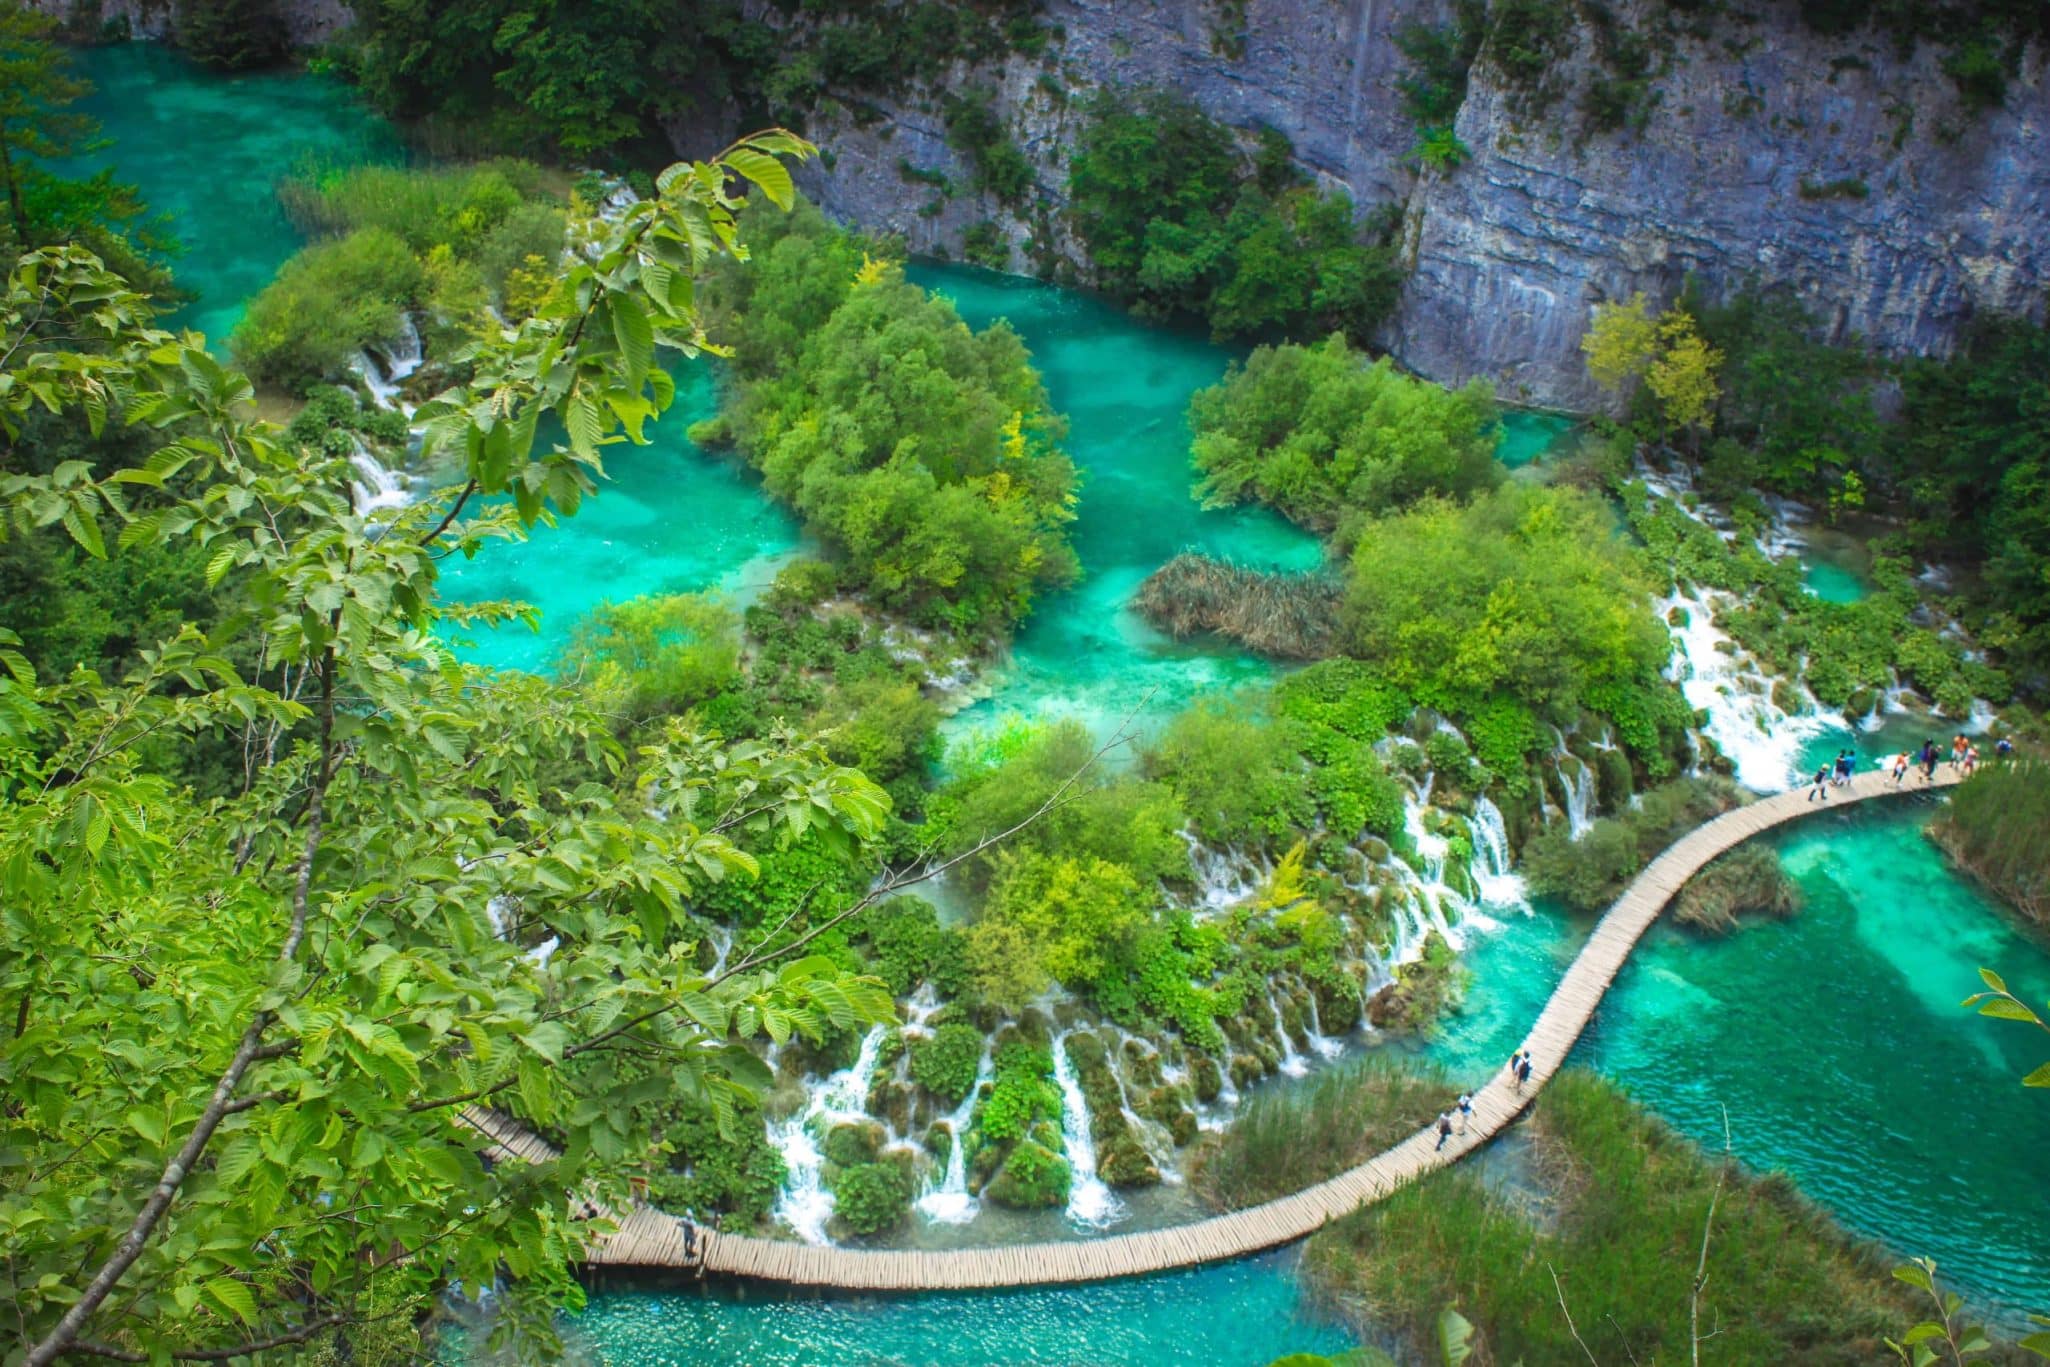 What to see at Plitvice Lakes National Park, Croatia (everything you need to know)